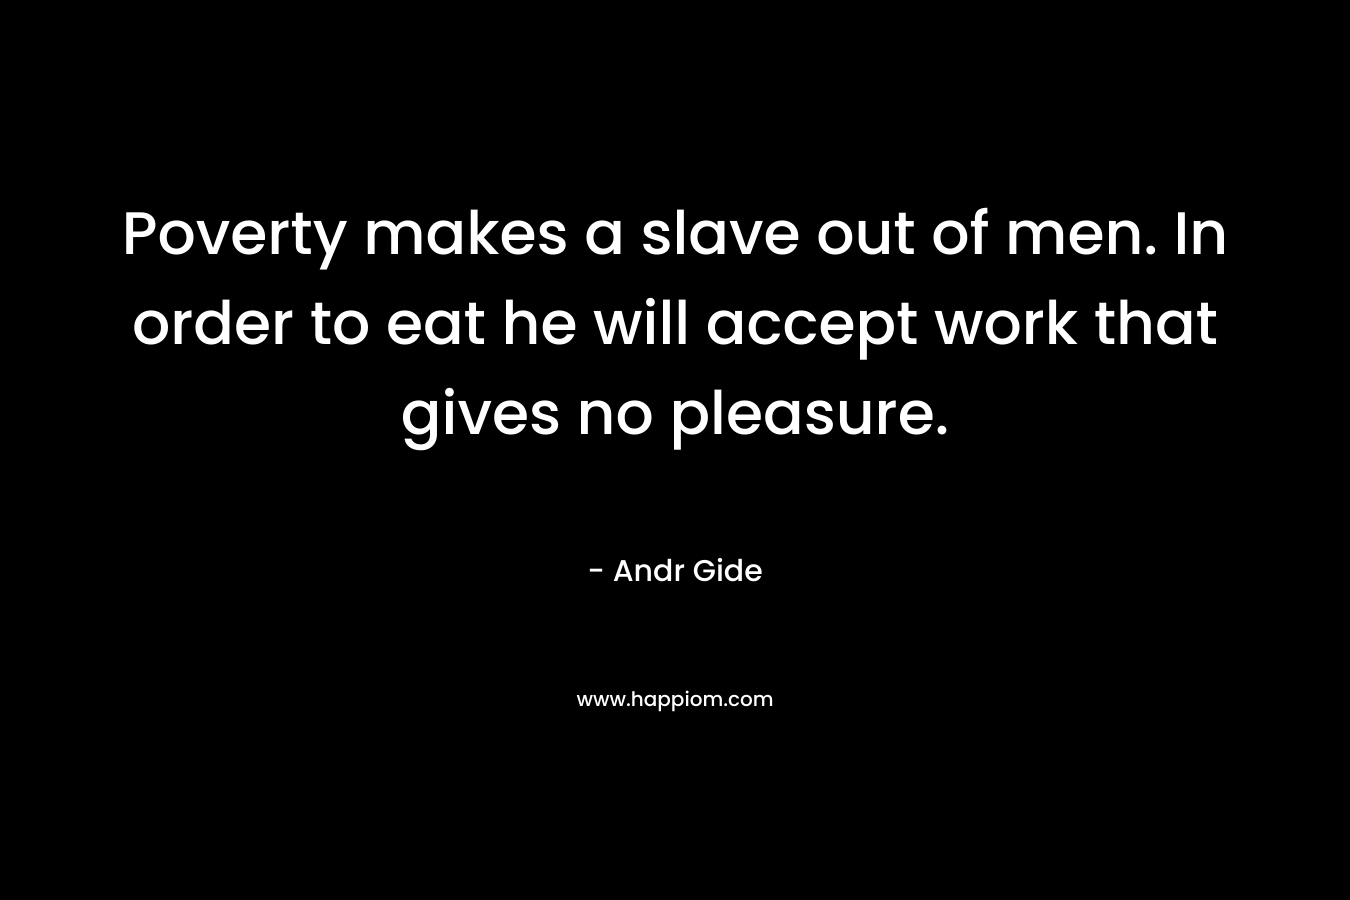 Poverty makes a slave out of men. In order to eat he will accept work that gives no pleasure. – Andr Gide